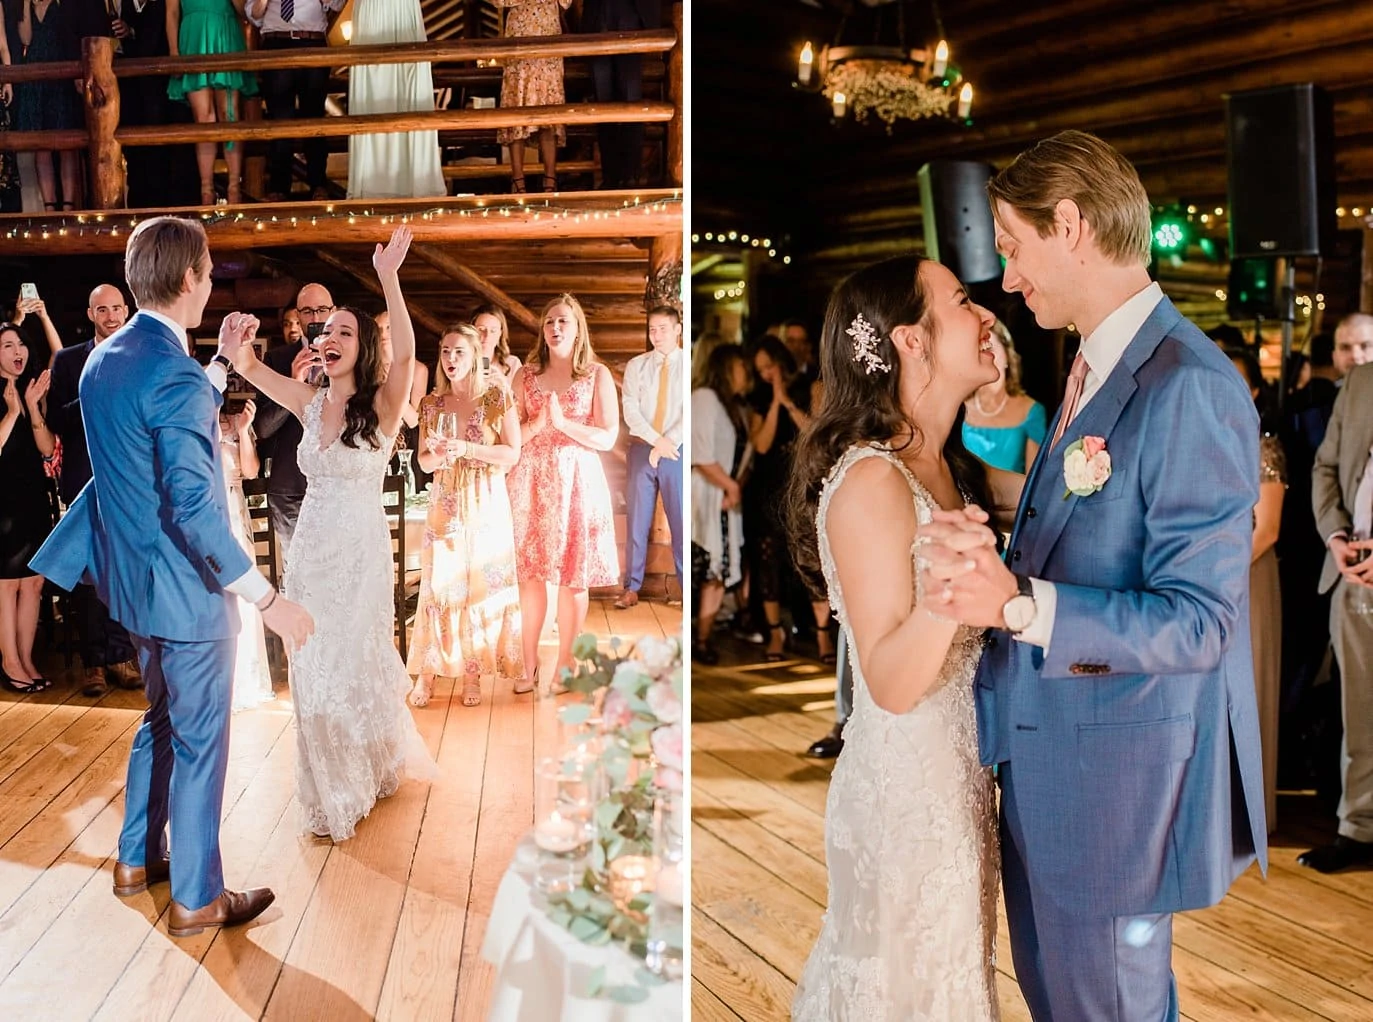 bride and groom share first dance at wedding reception at t Twin Owls Steakhouse wedding by Estes Park wedding photographer Jennie Crate photographer